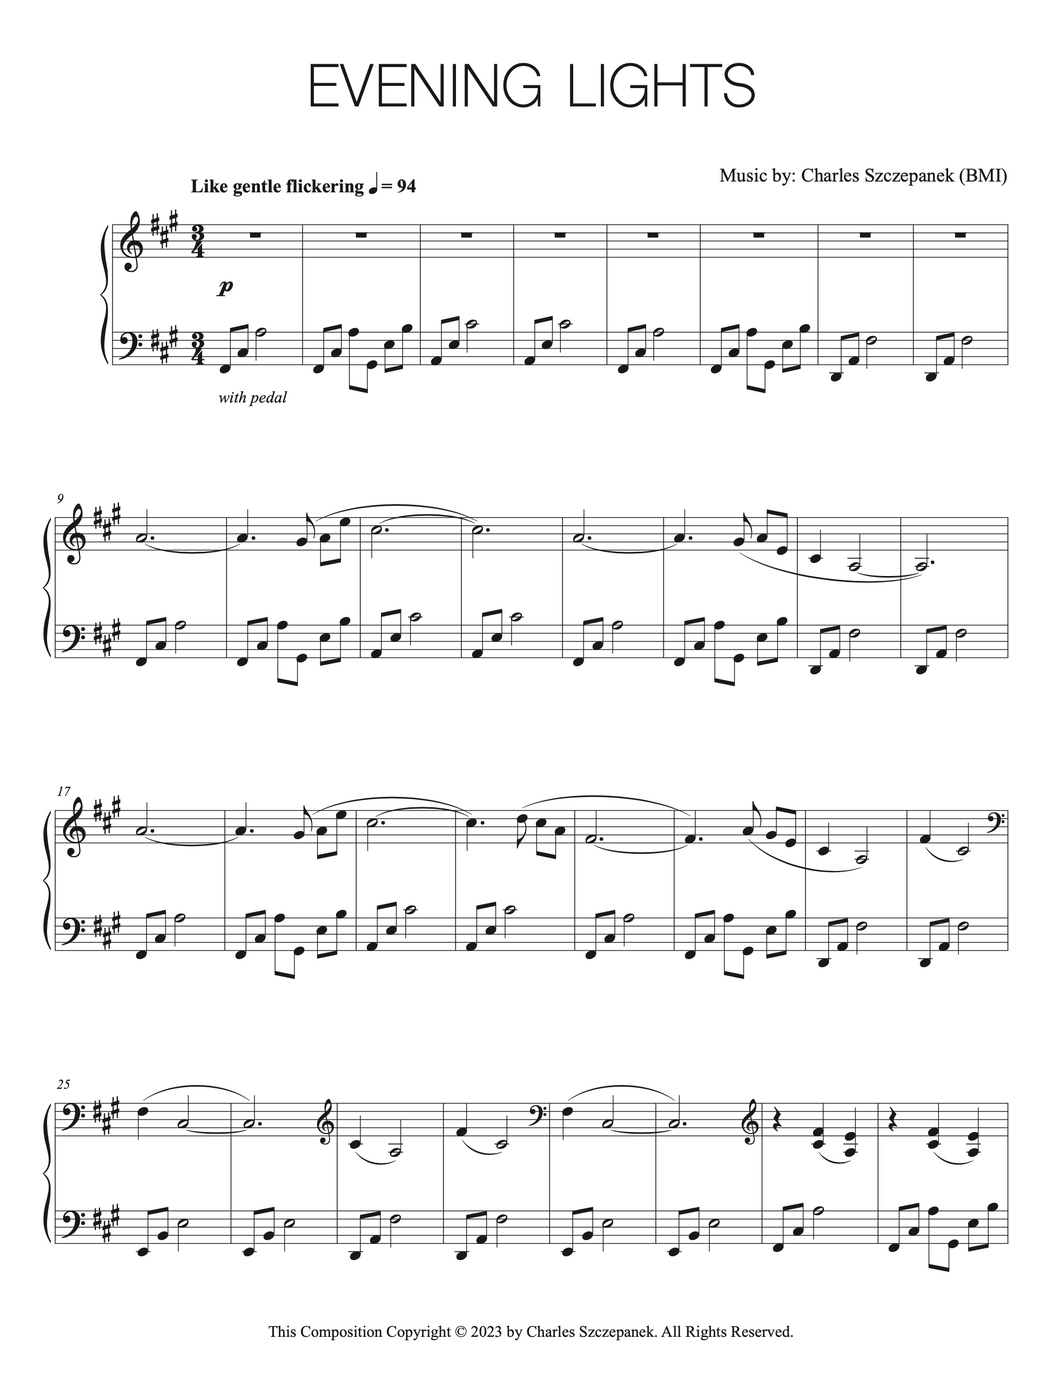 Evening Lights - Sheet Music for Solo Piano